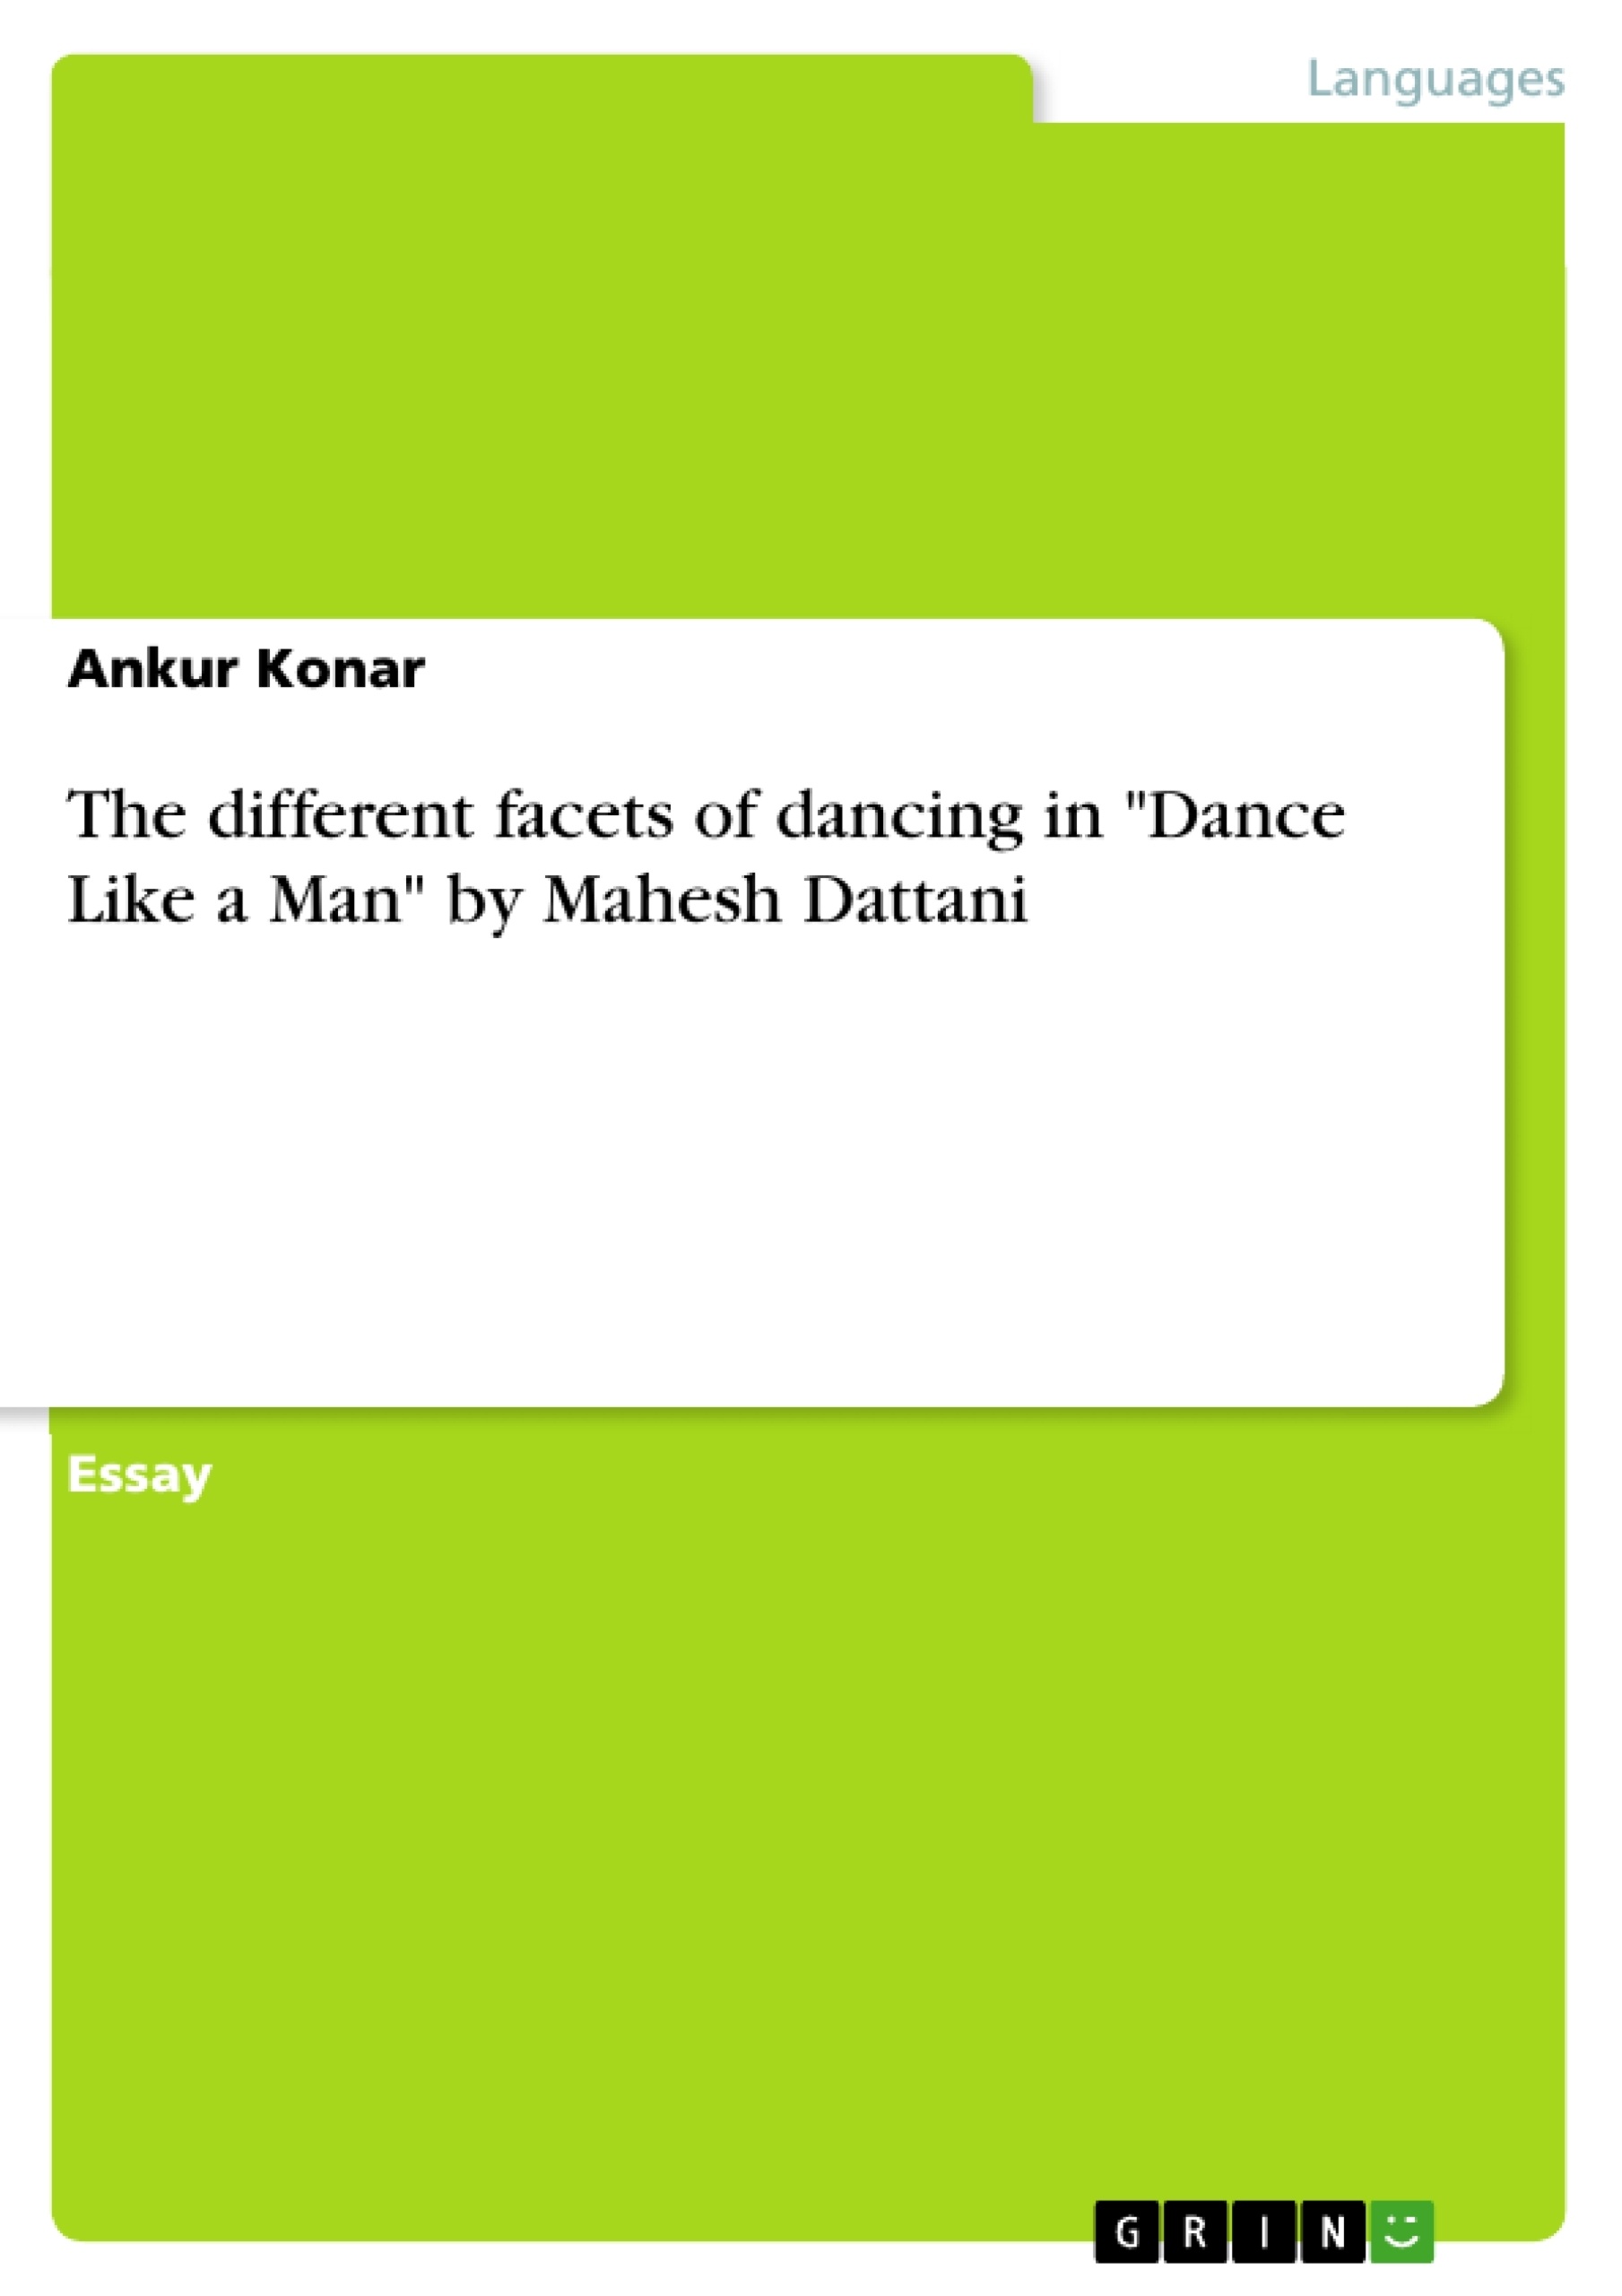 Titre: The different facets of dancing in "Dance Like a Man" by Mahesh Dattani